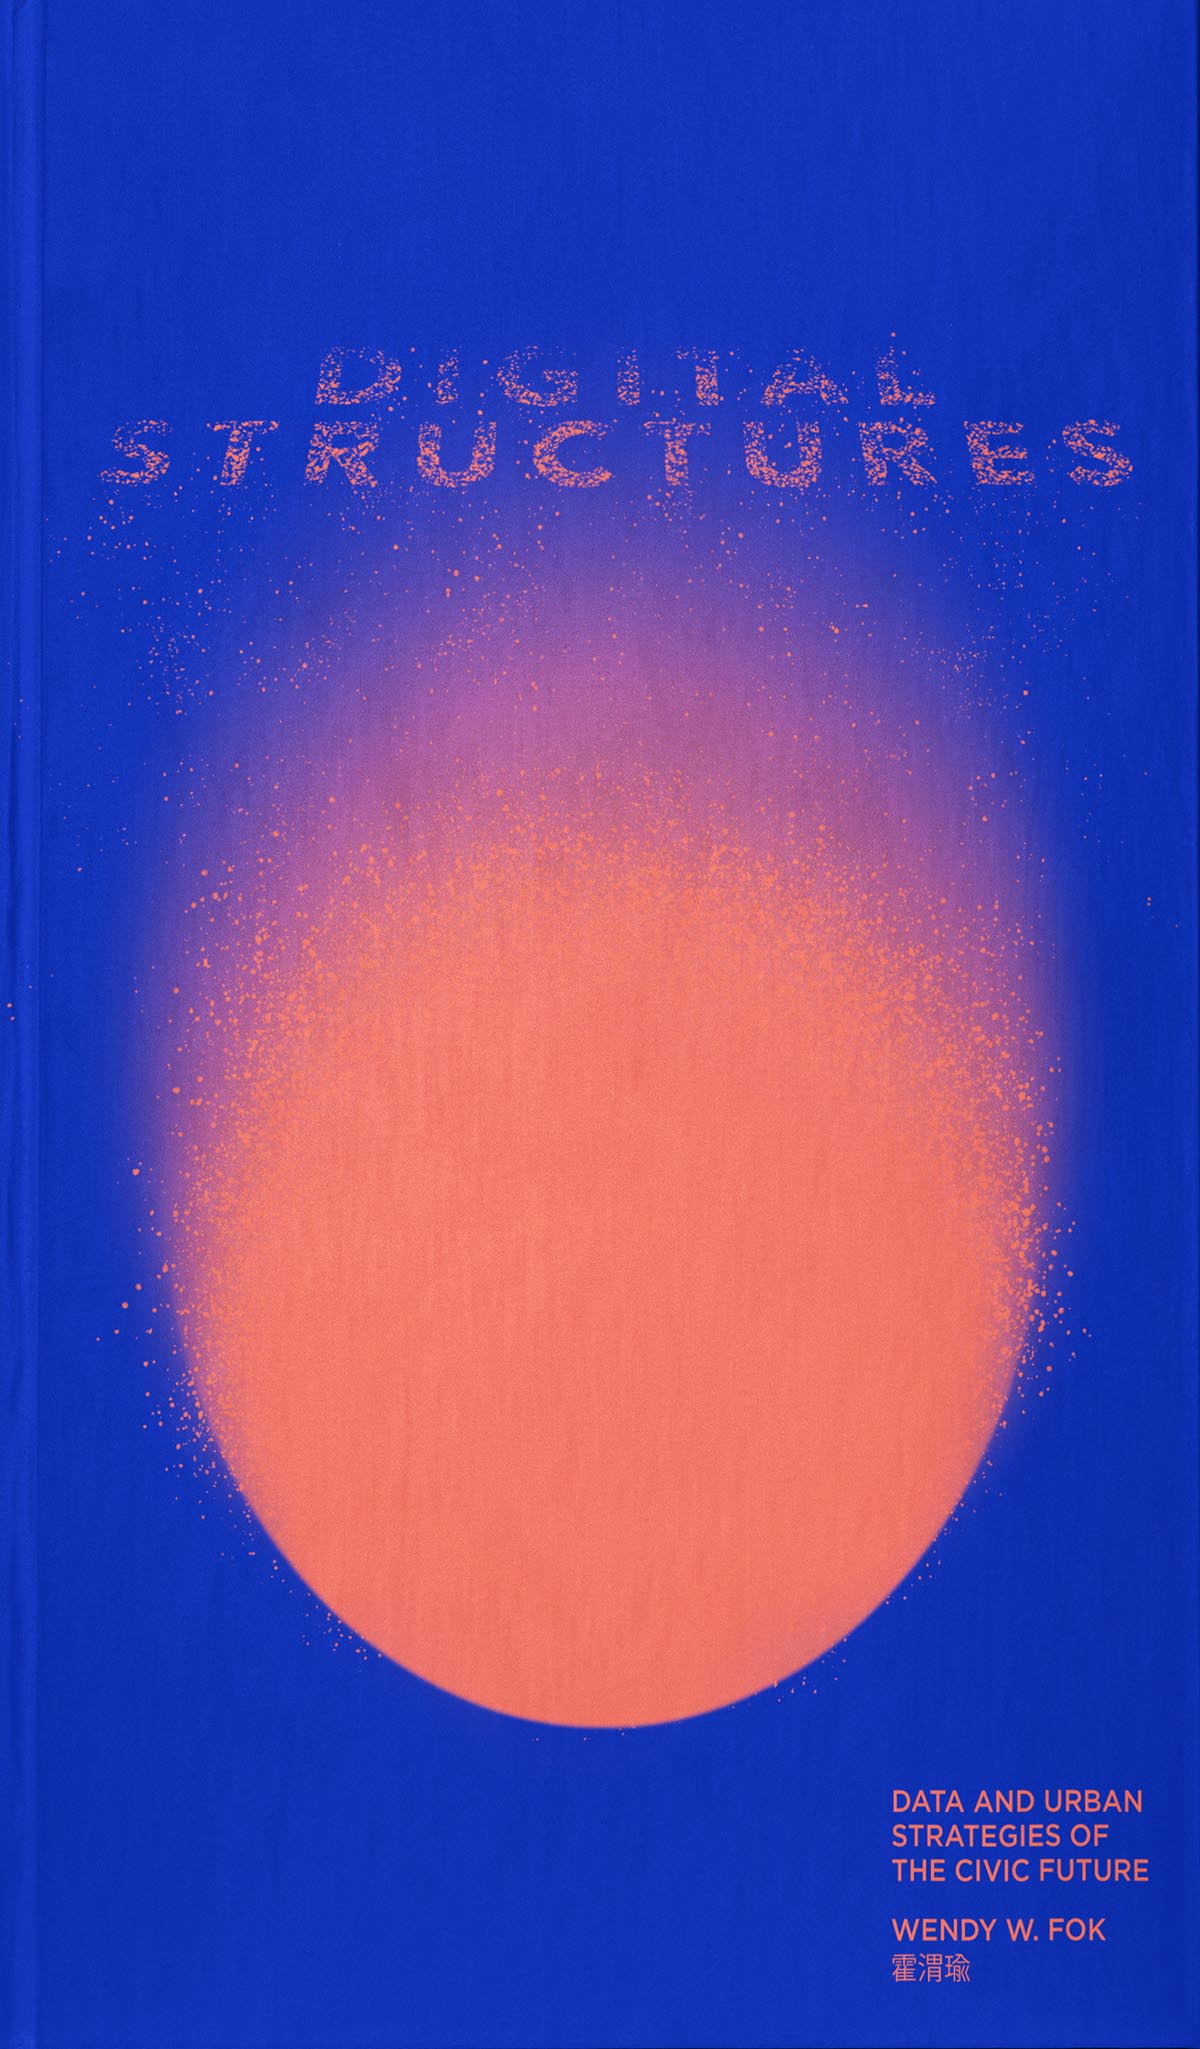 Top 10 architecture books by ORO Editions and AR+D to look forward to in 2023 